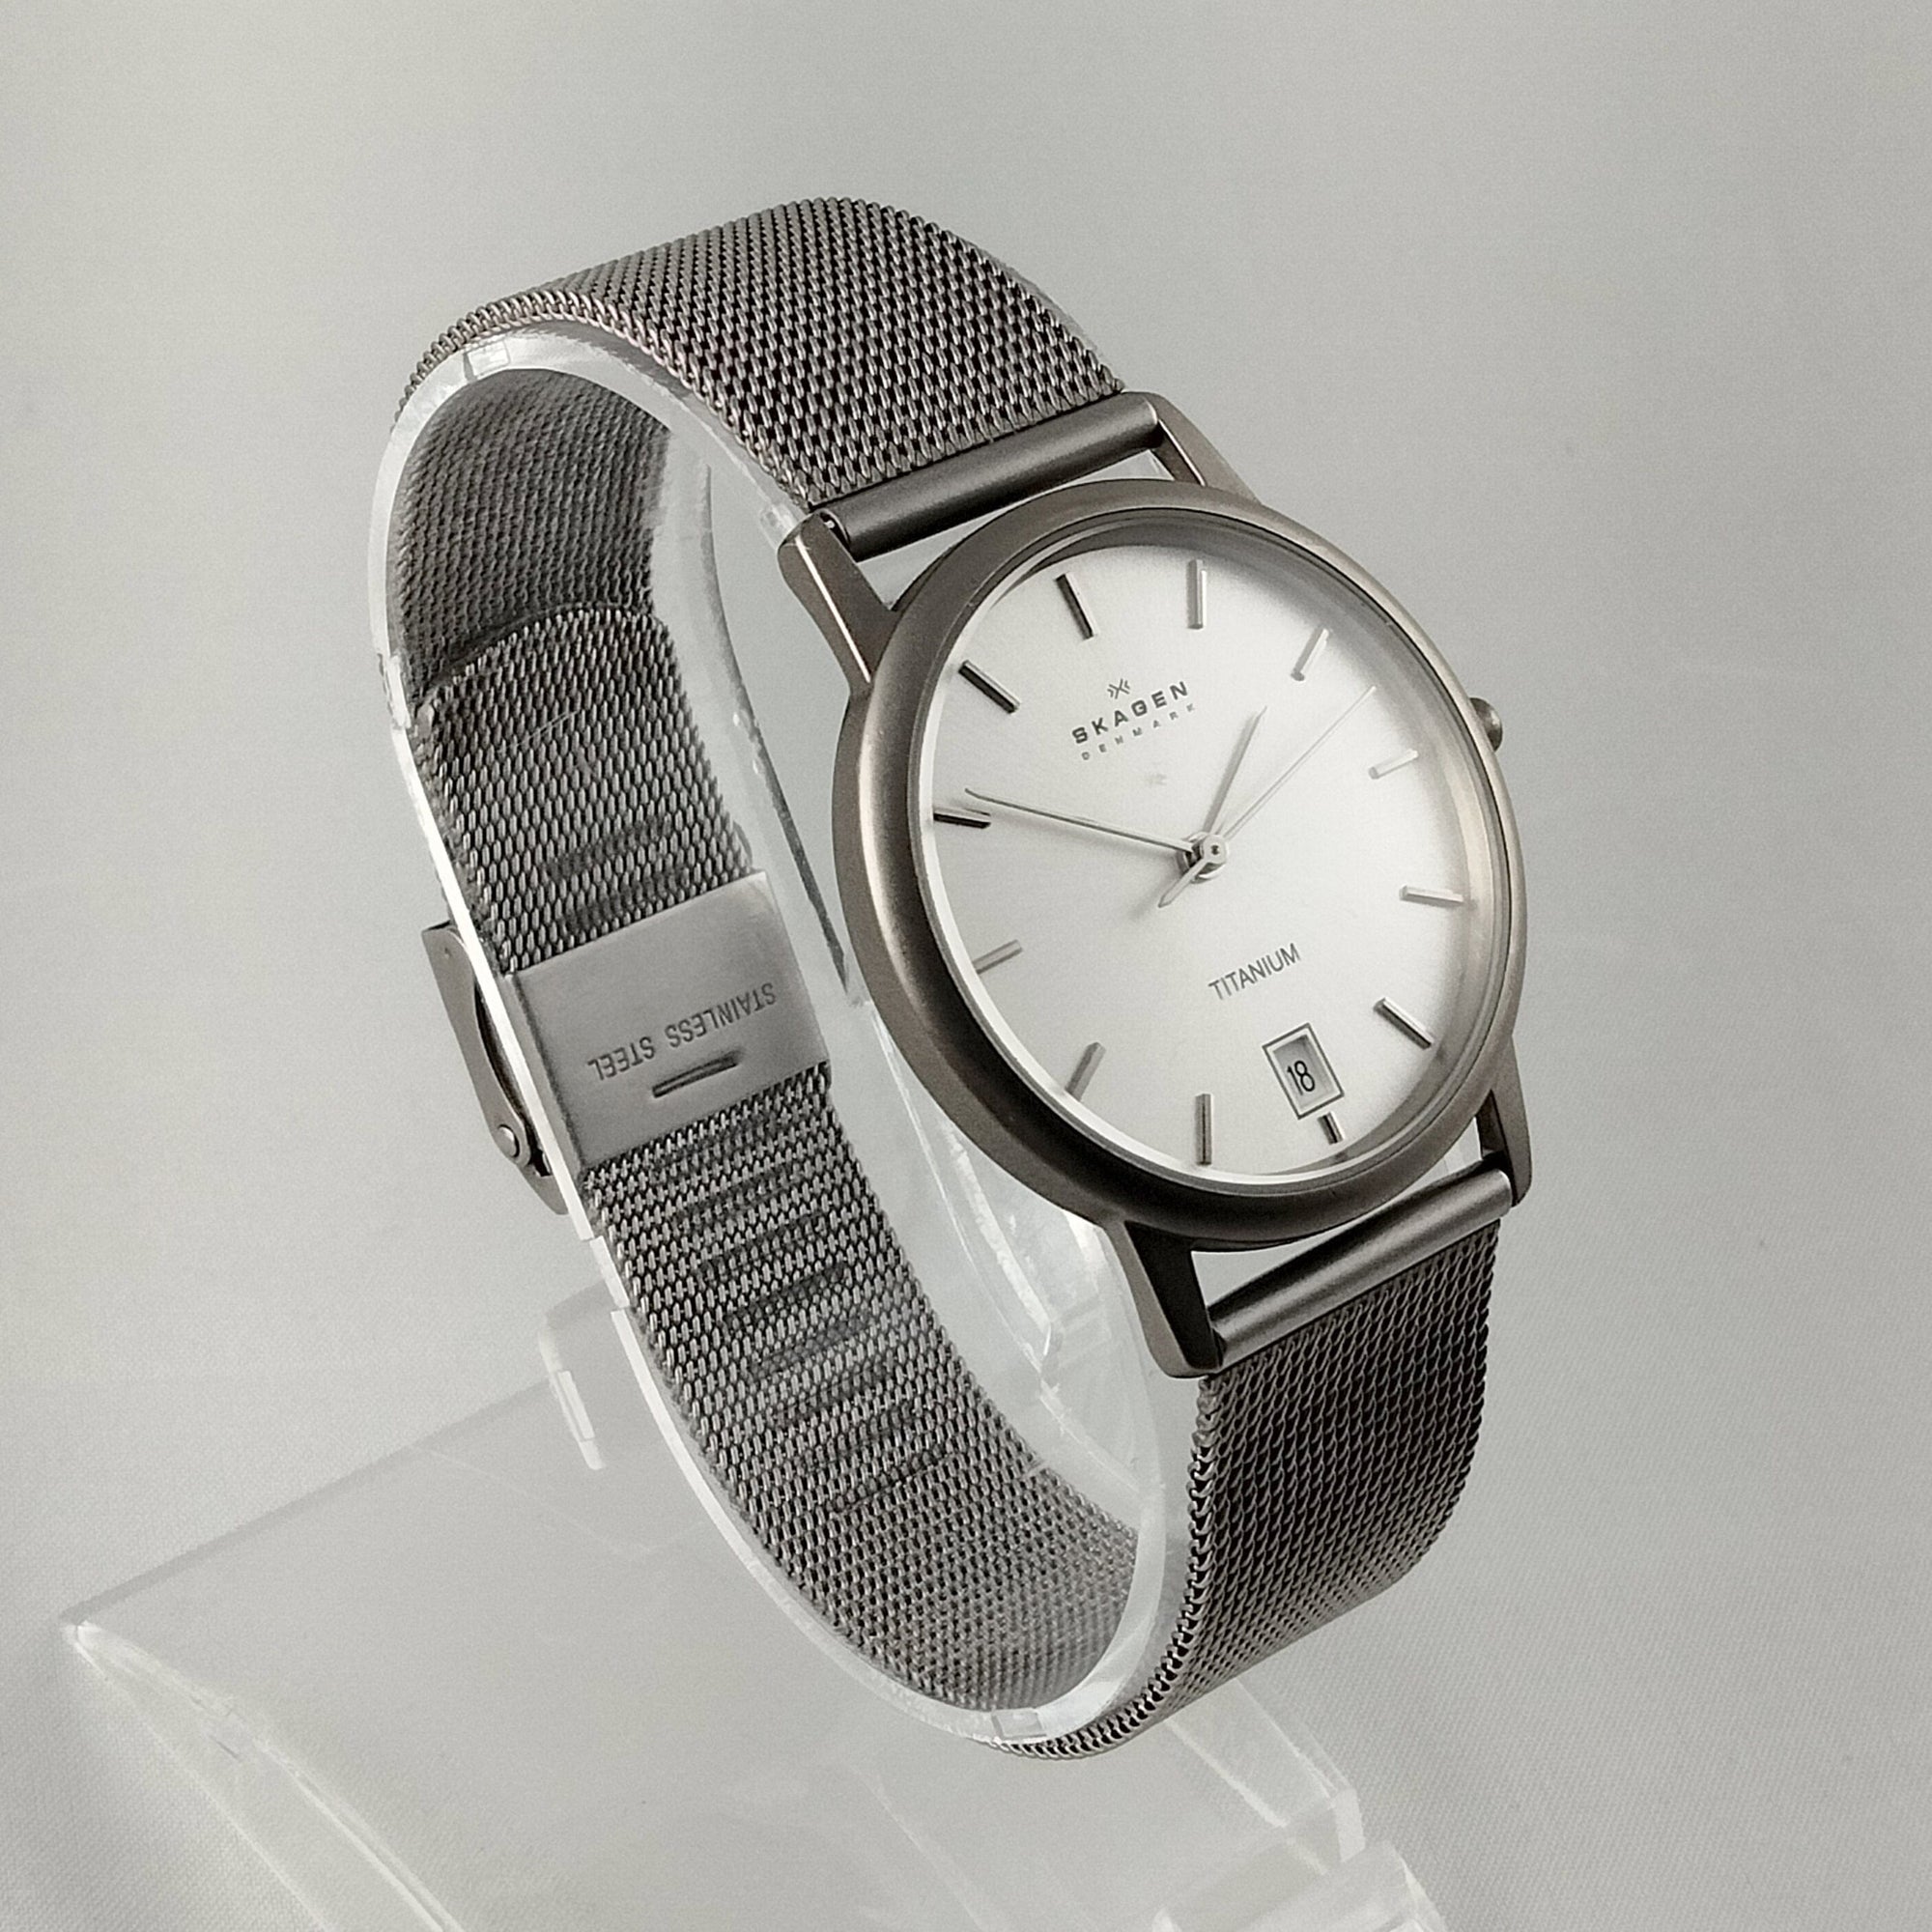 I Like Mikes Mid Century Modern Watches Skagen Men's Stainless Steel Watch, Large White Dial, Mesh Strap